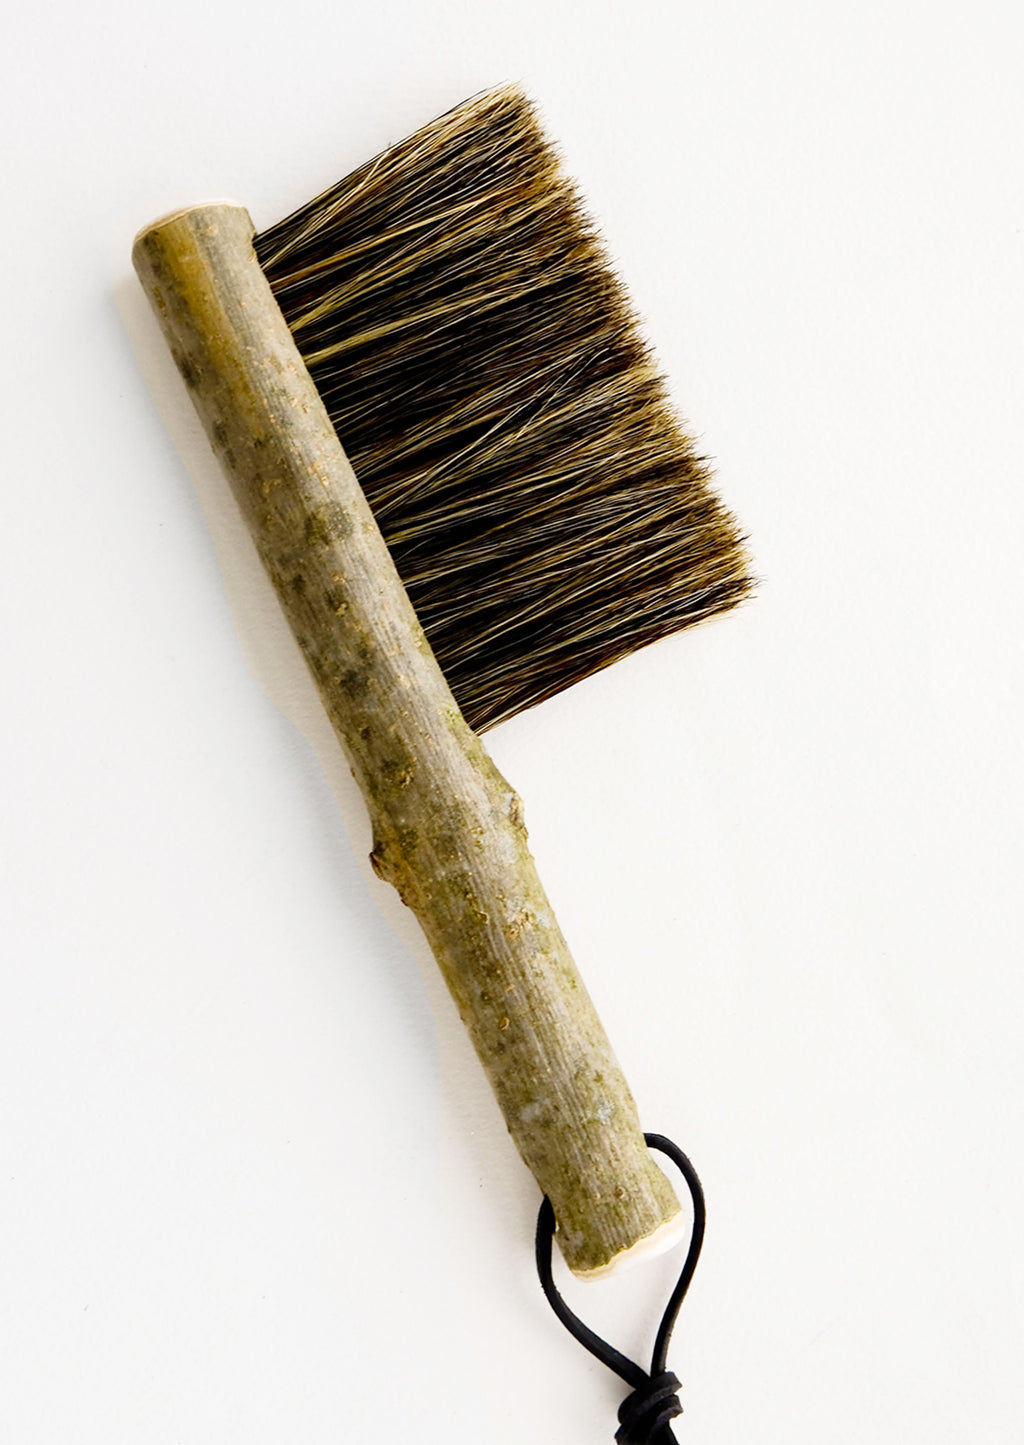 1: Bristle brush with natural bark handle and leather tie at end